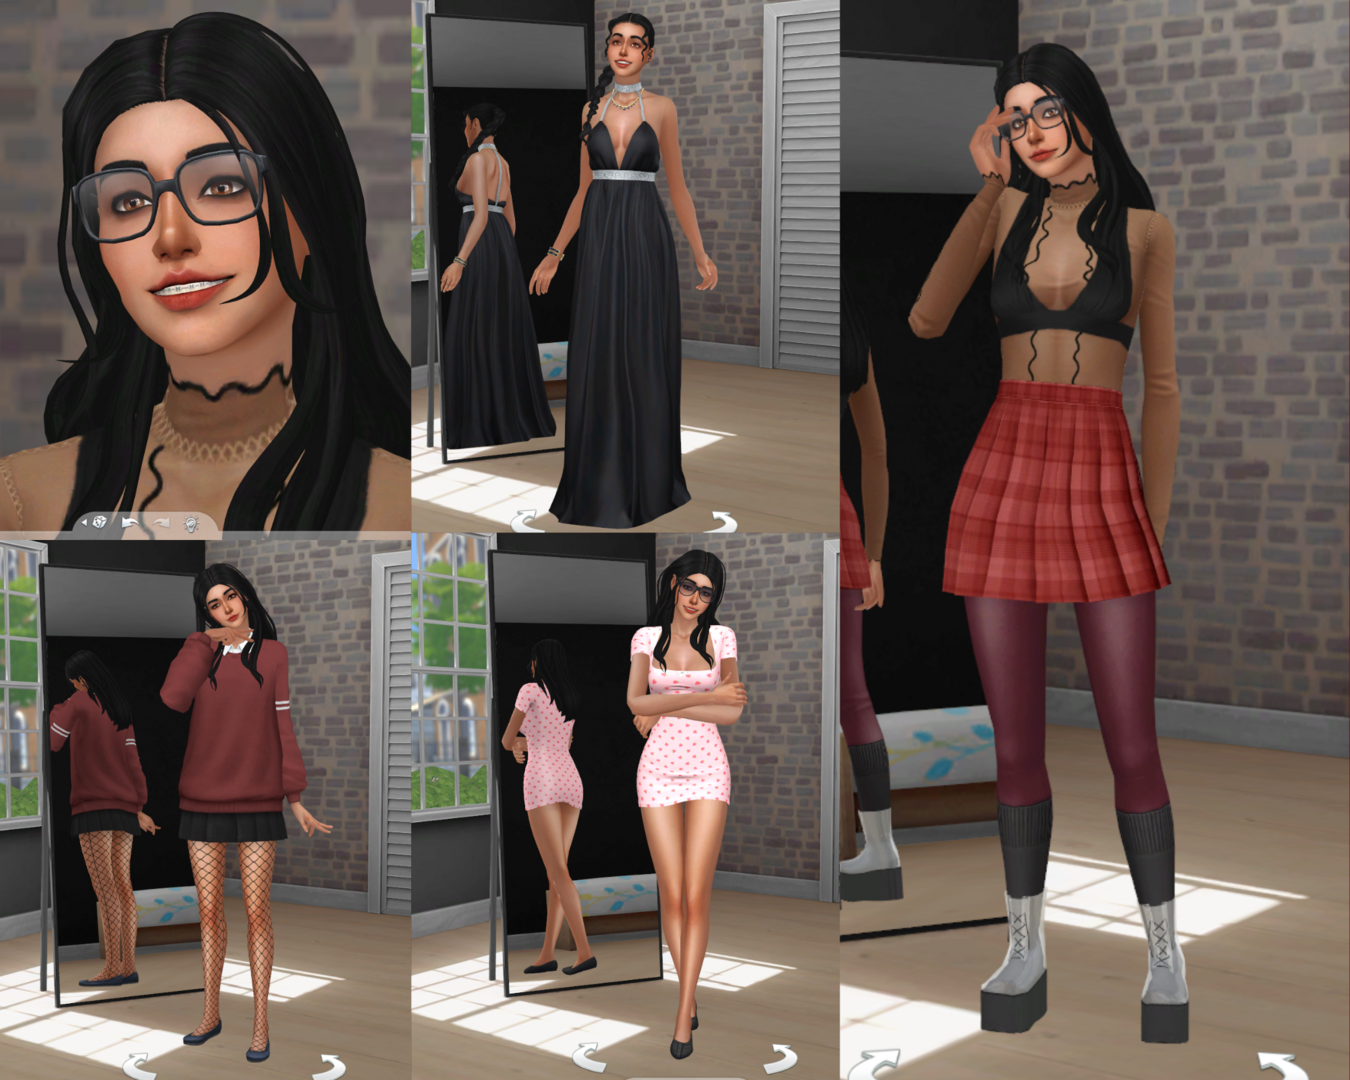 ⋆ ˚｡⋆୨୧˚ Townie Makeover ˚୨୧⋆｡˚ ⋆ The Sims 4 Sims Loverslab